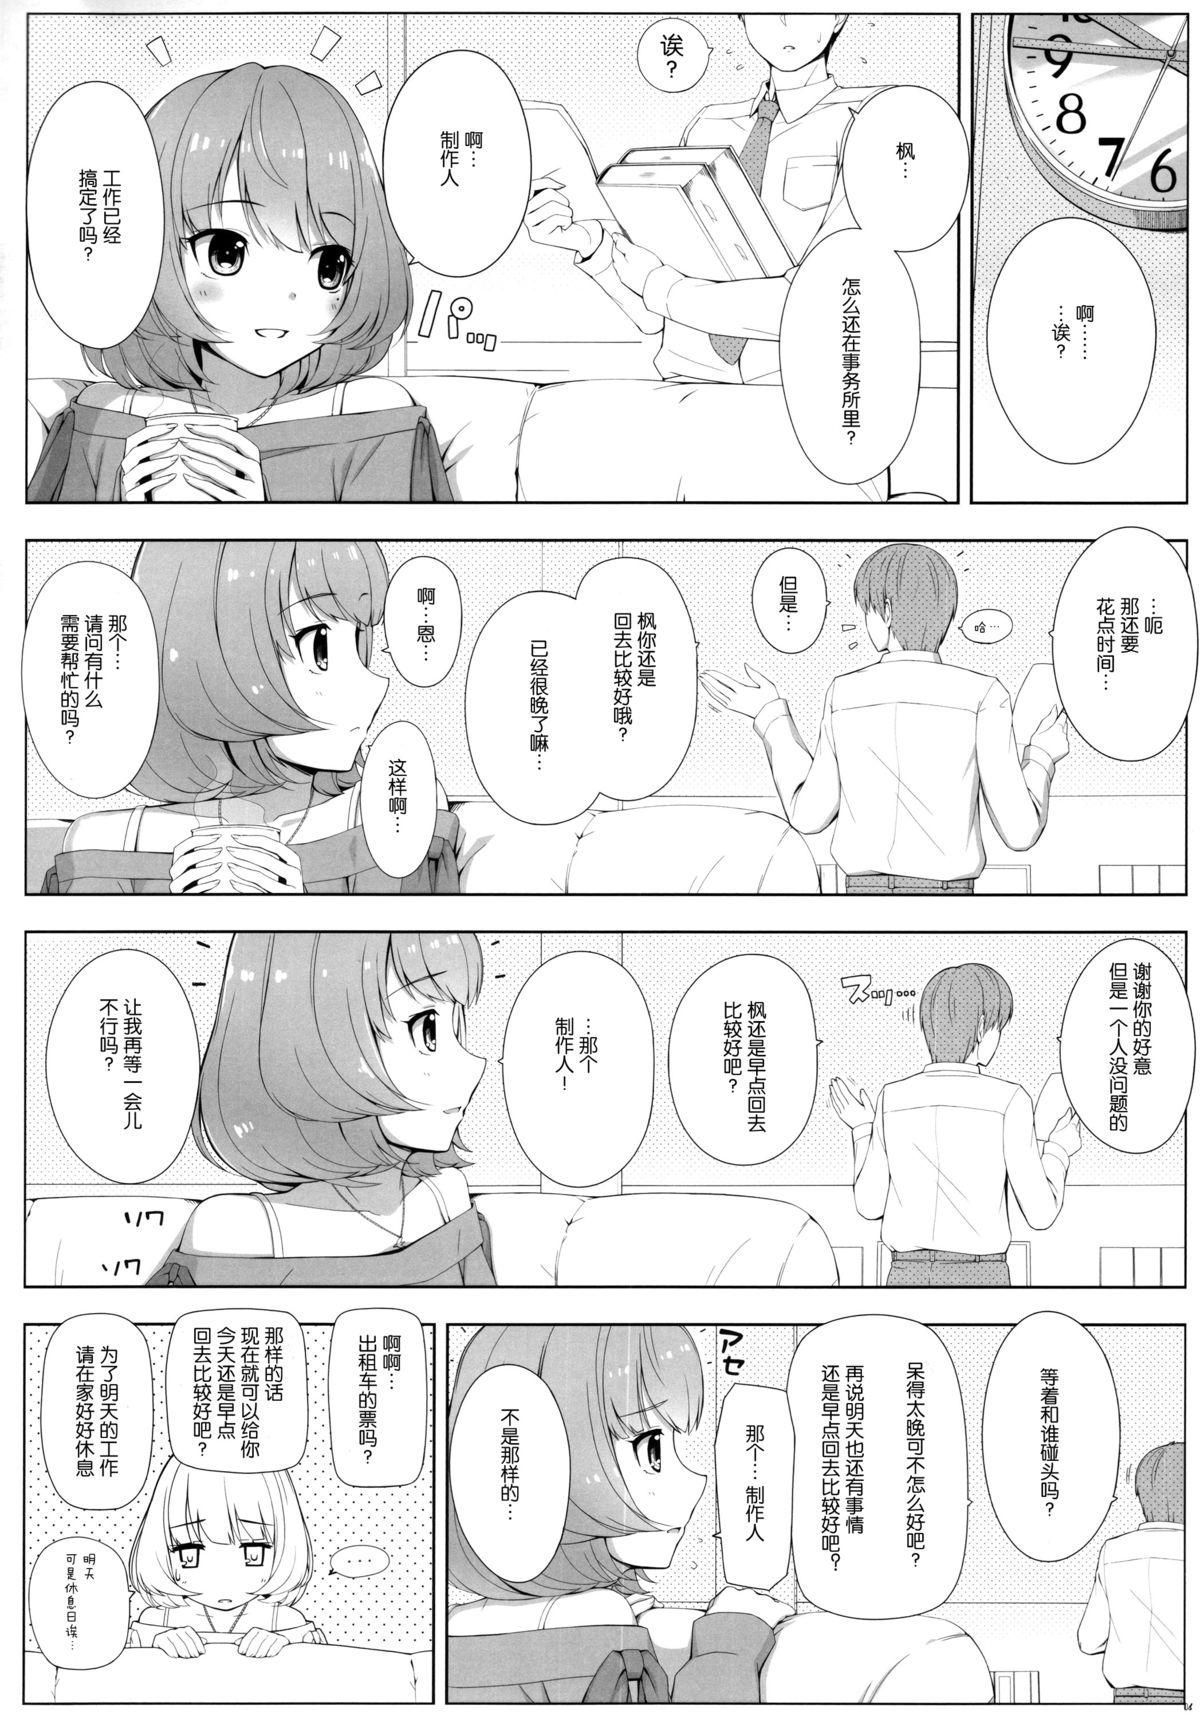 Cameltoe BAD COMMUNICATION? 16 - The idolmaster Dirty - Page 7